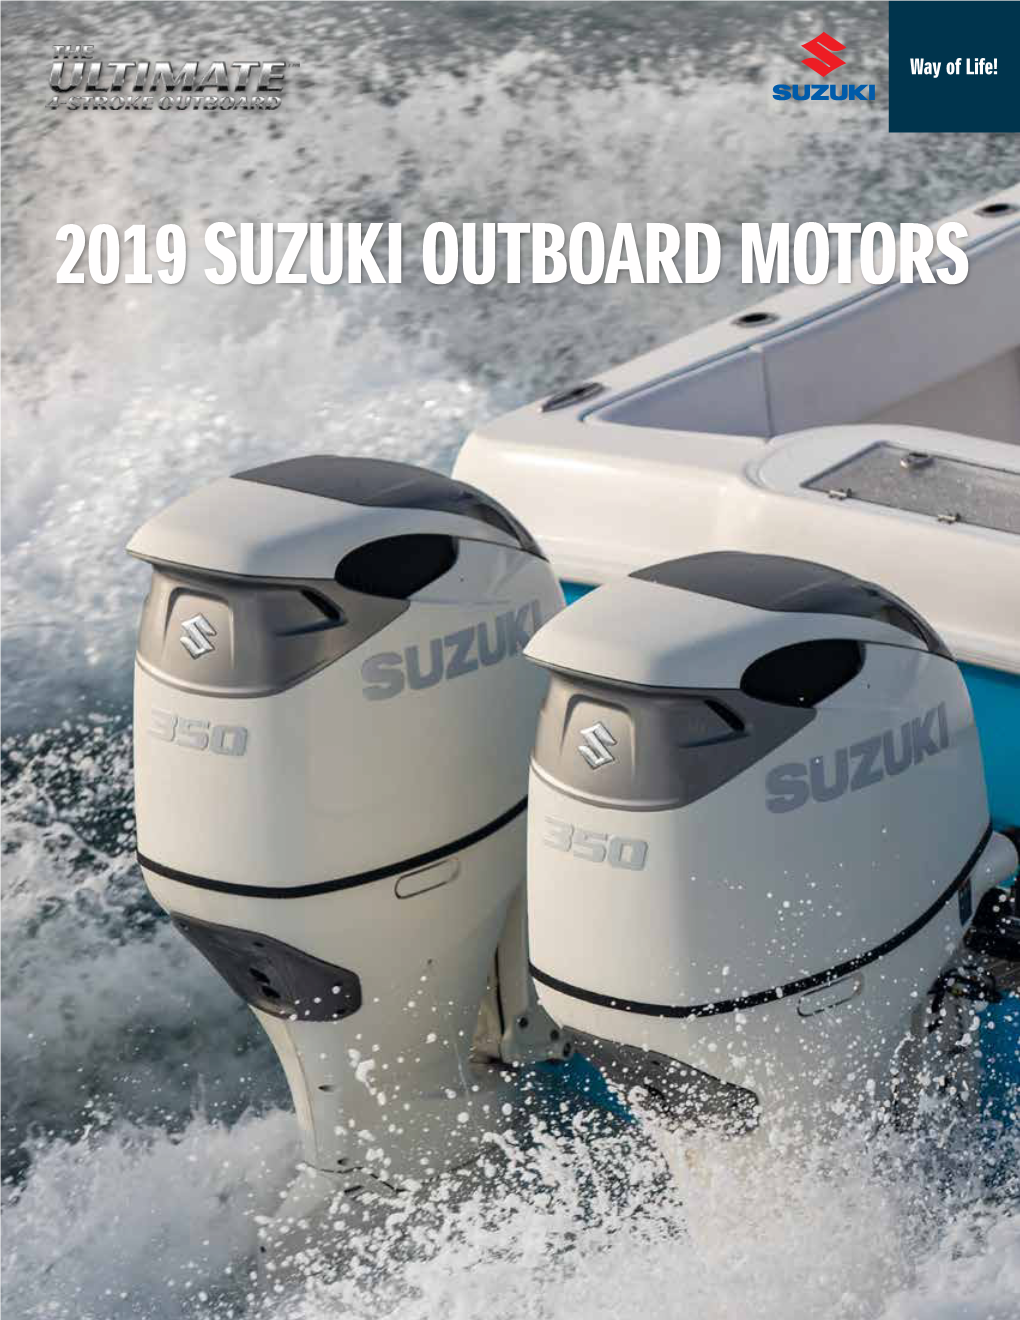 2019 Suzuki Outboard Motors Discover the Ultimate Marine Experience with Suzuki Outboards